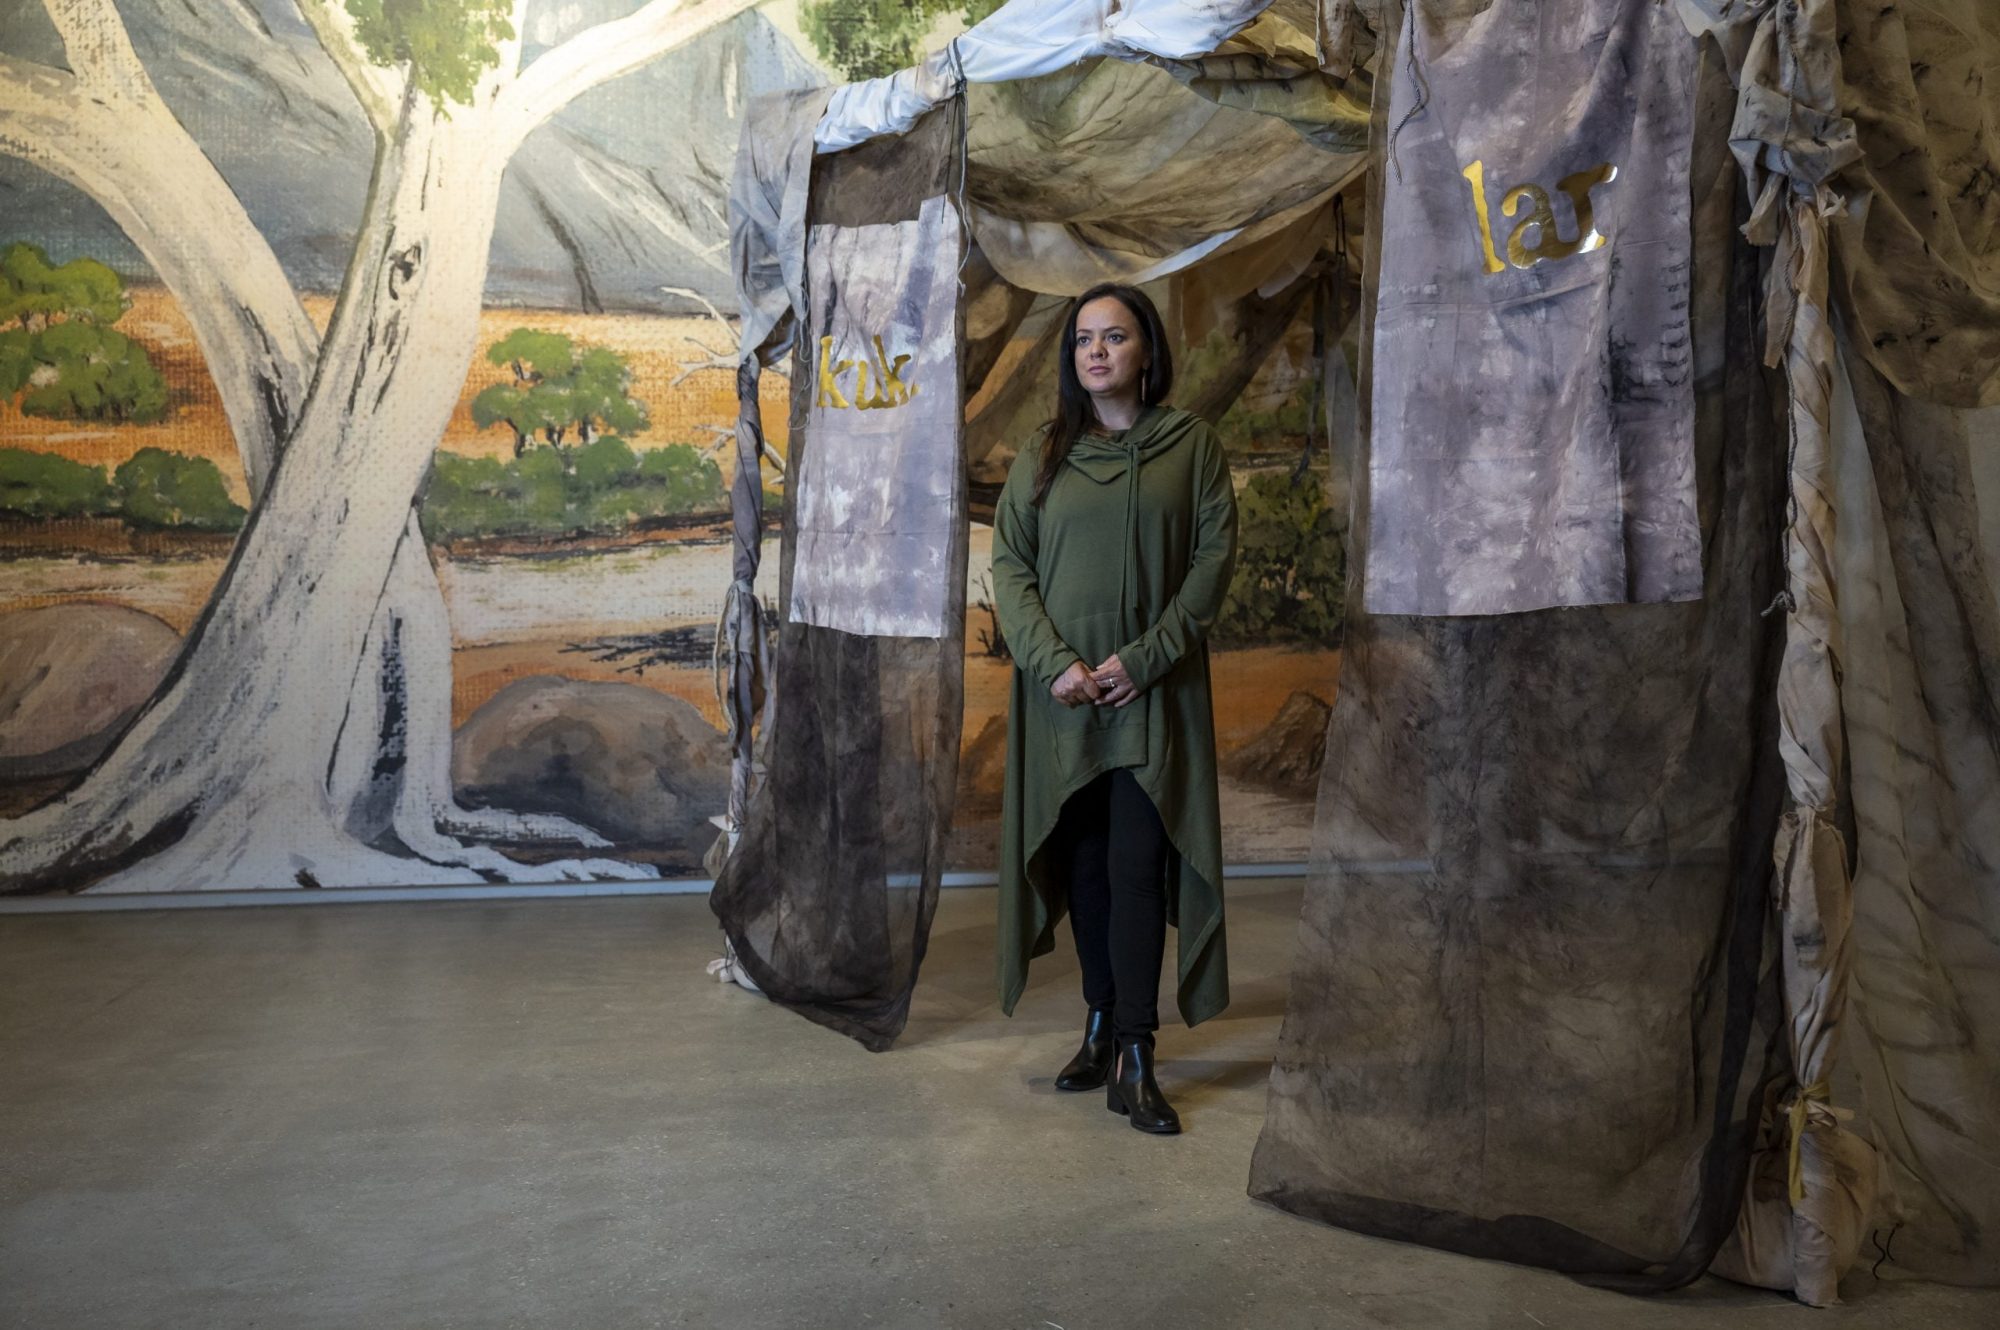 Stacie Piper standing in Paola Balla's 'Murrup (Ghost) Weaving in Rosie Kuka Lar (Grandmother’s Camp)' 2021. Installation view (detail), Tarrawarra Museum of Art. Photograph: T. J. Garvie